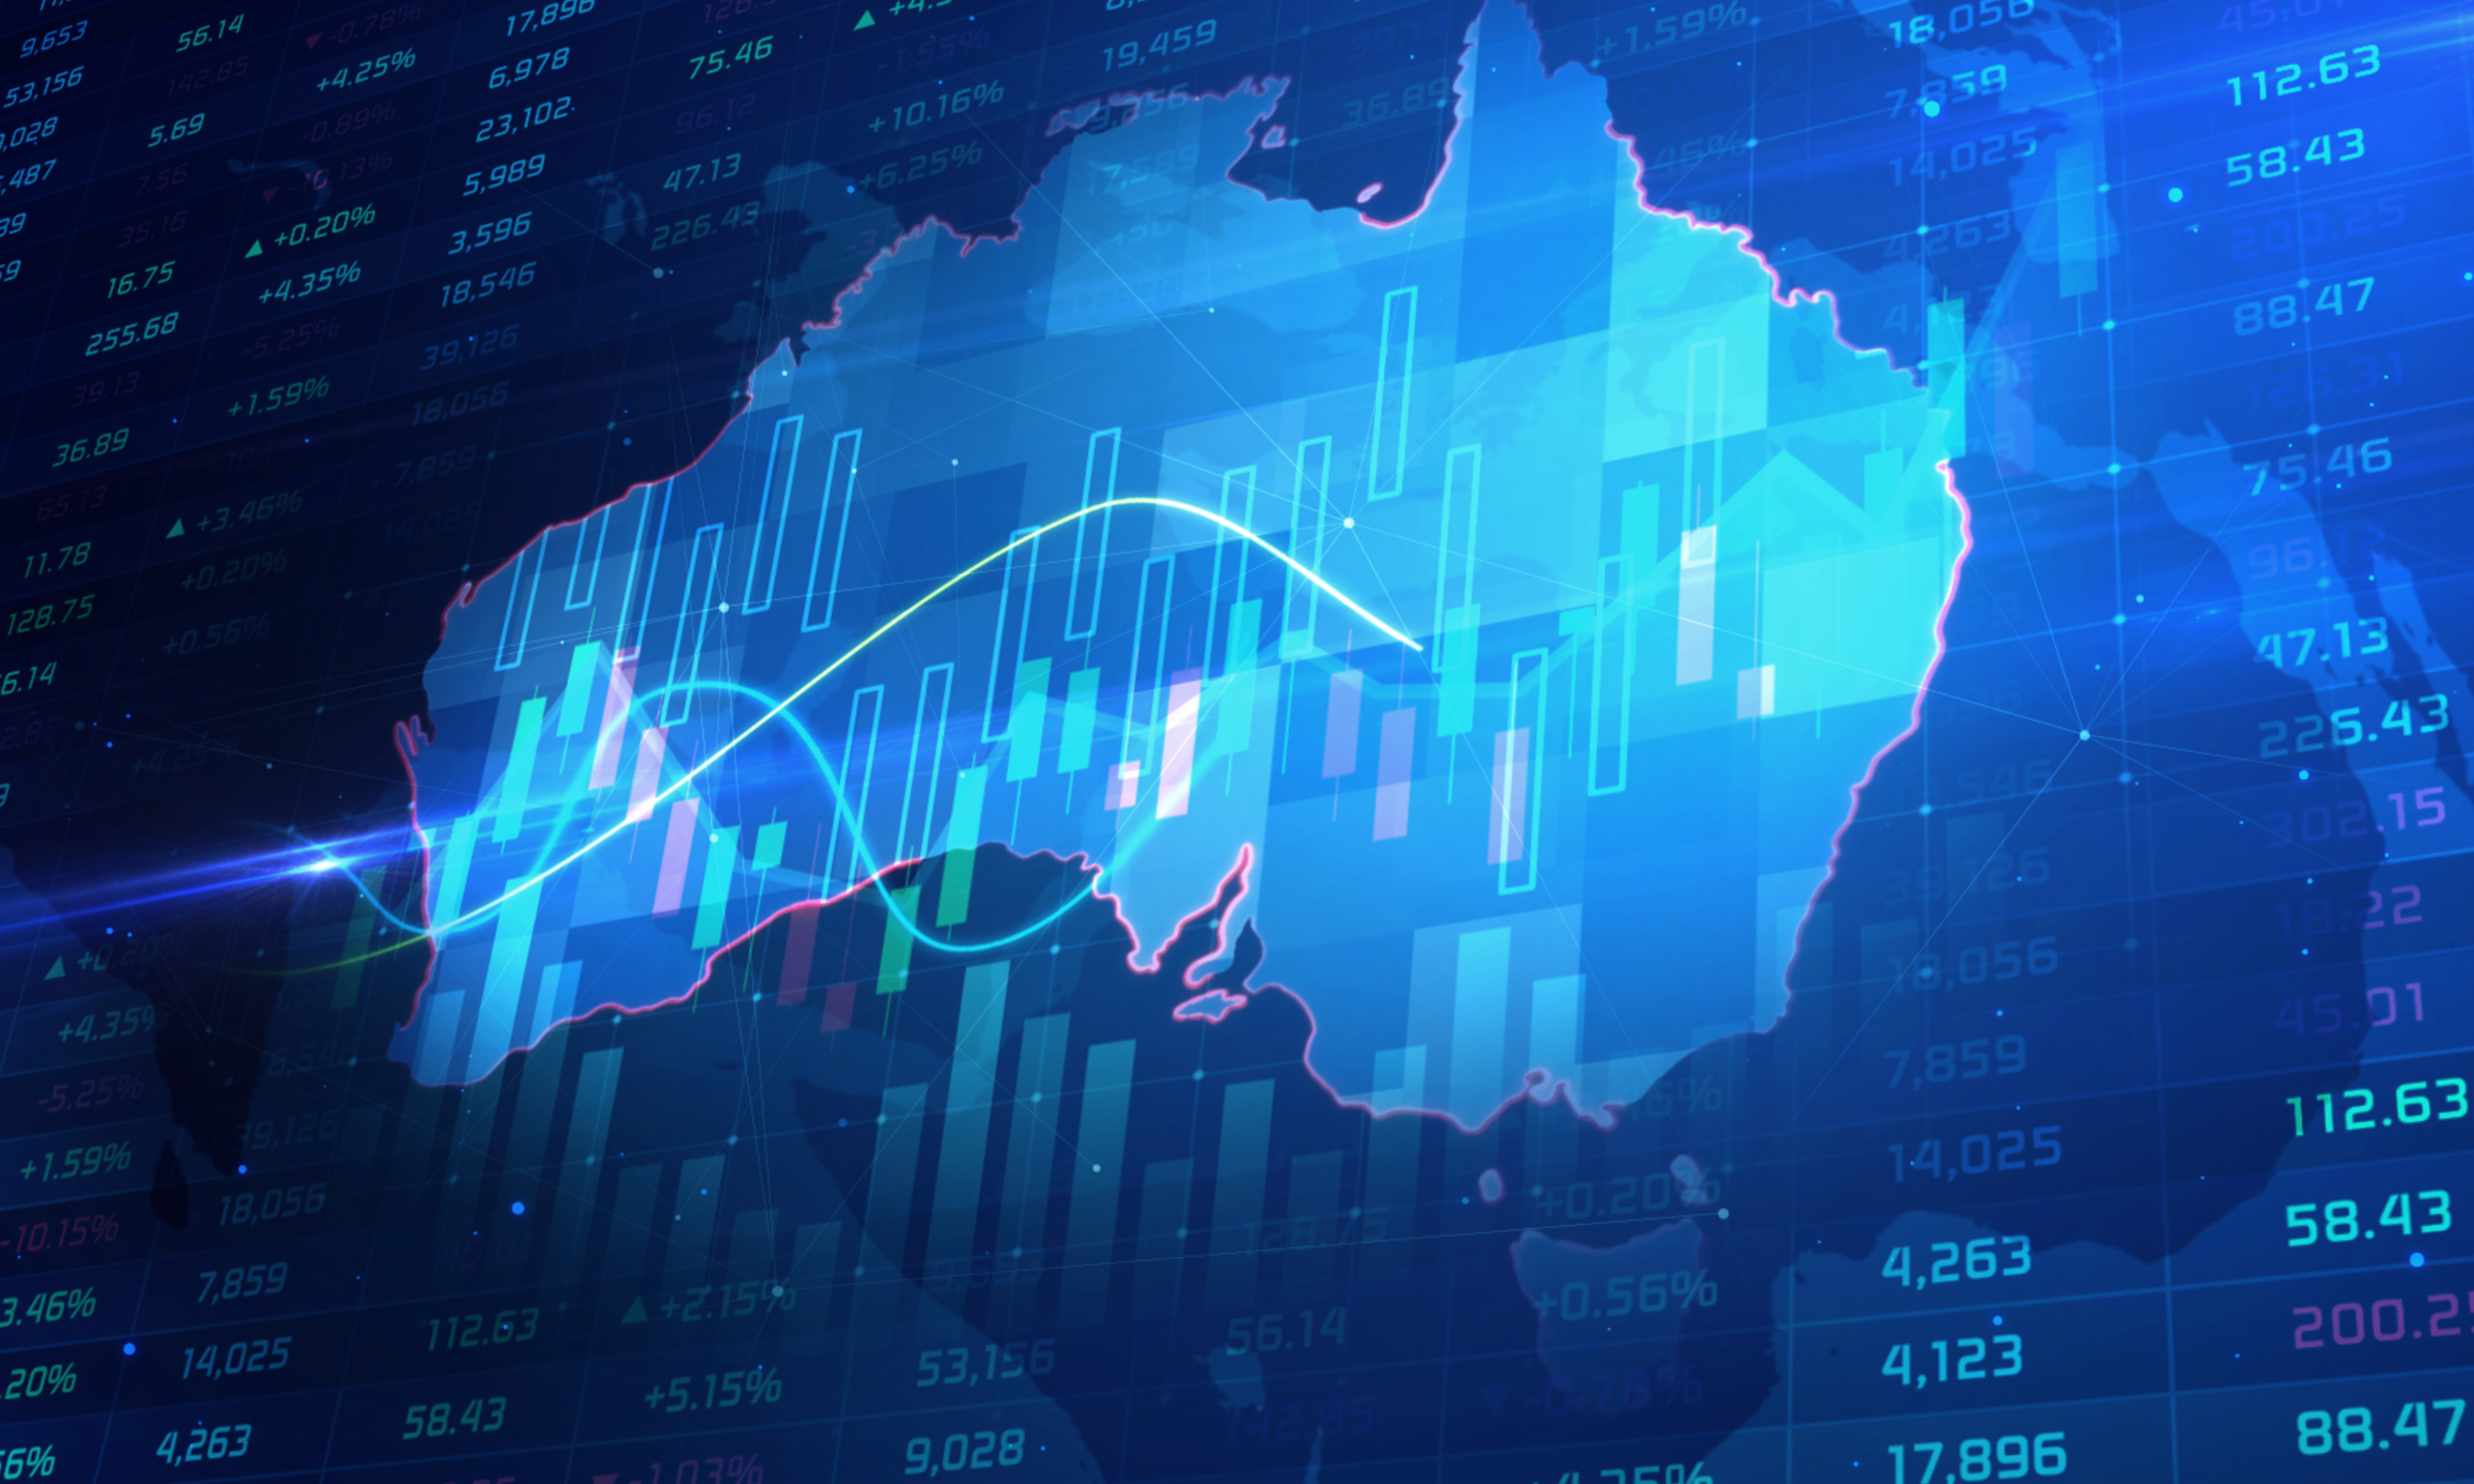 The growth rate of the stock market and the Australia economy